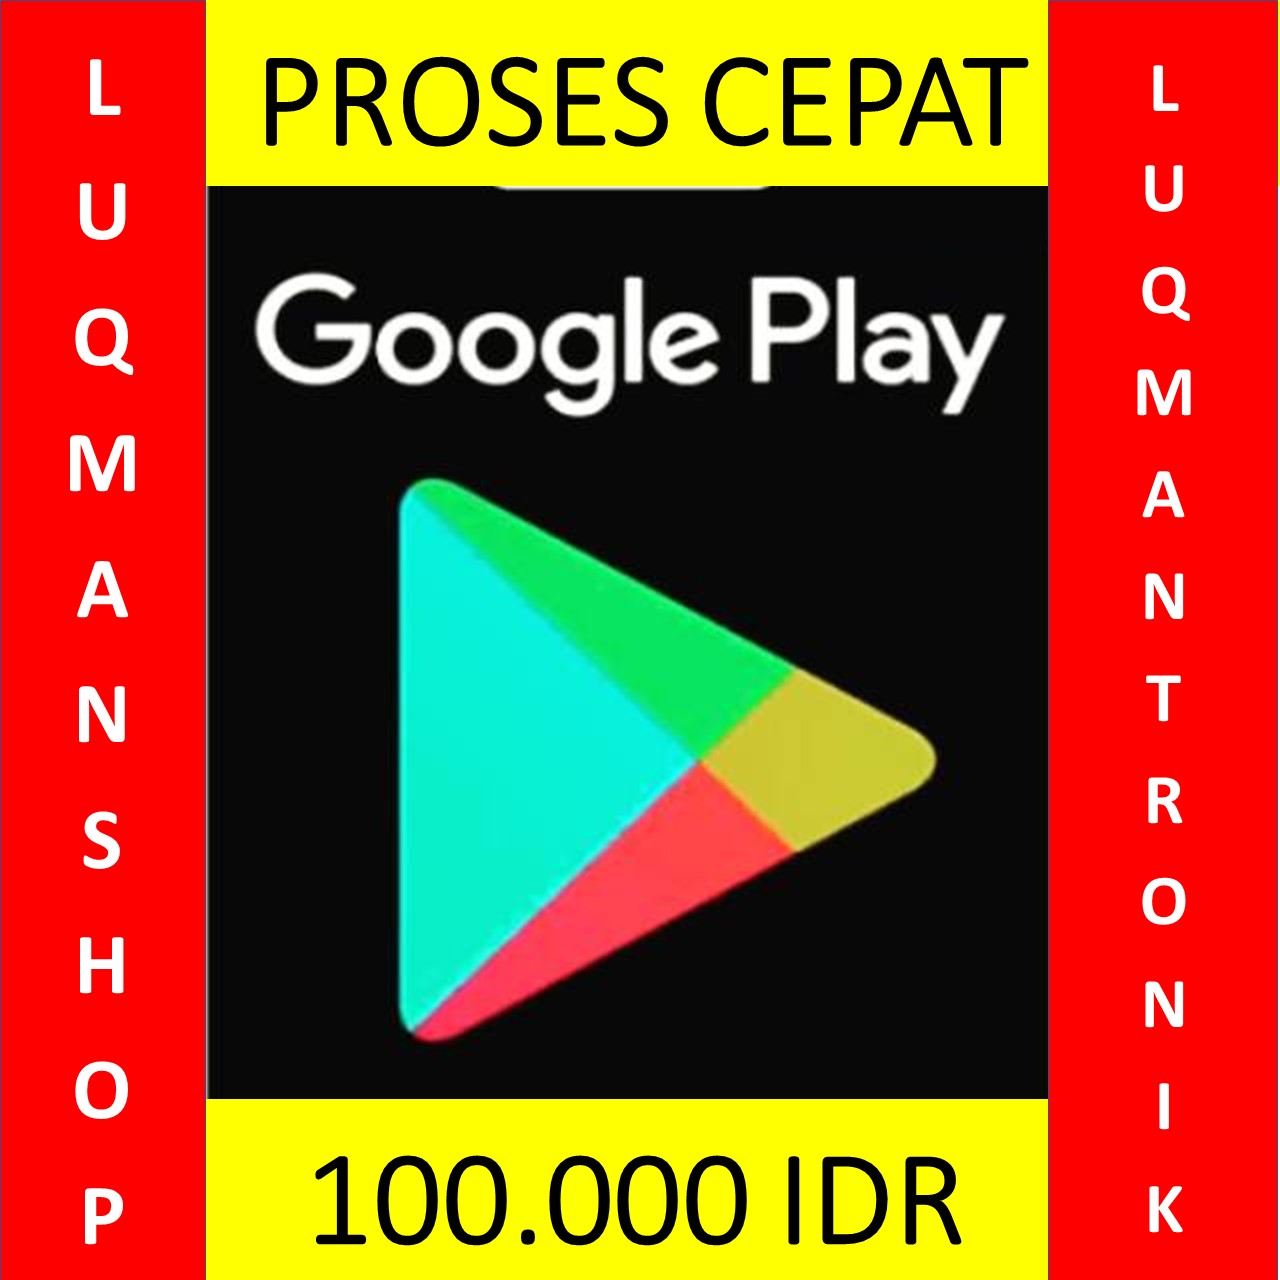 Voucher Game GOOGLE PLAY INDONESIA - Google Play Gift Card Indonesia Rp. 100.000